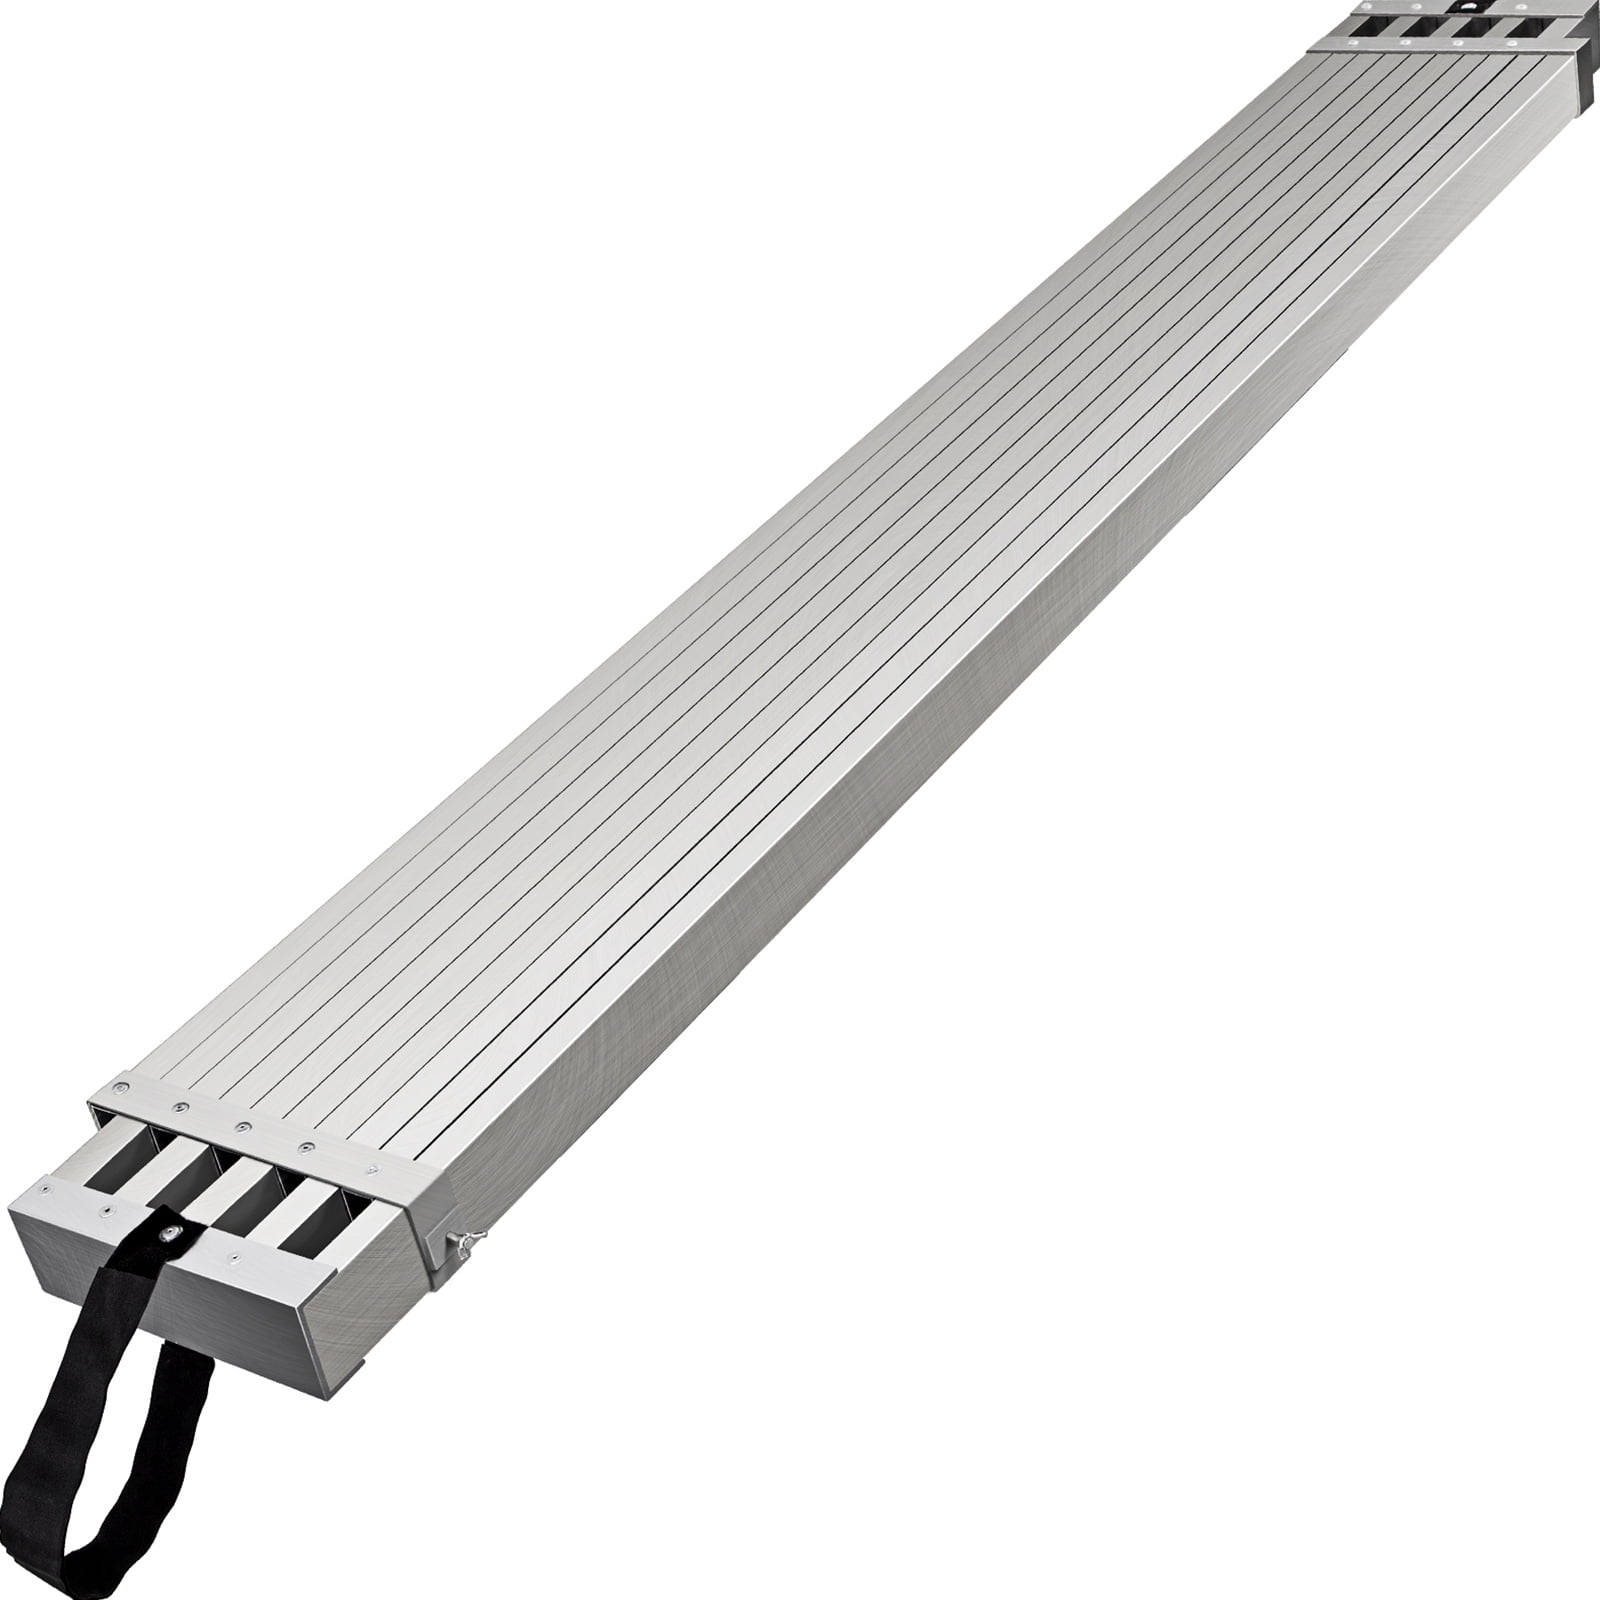 Scaffold Plank 6 ft Telescoping Aluminum Extension 250 lbs Capacity - 9 ft 